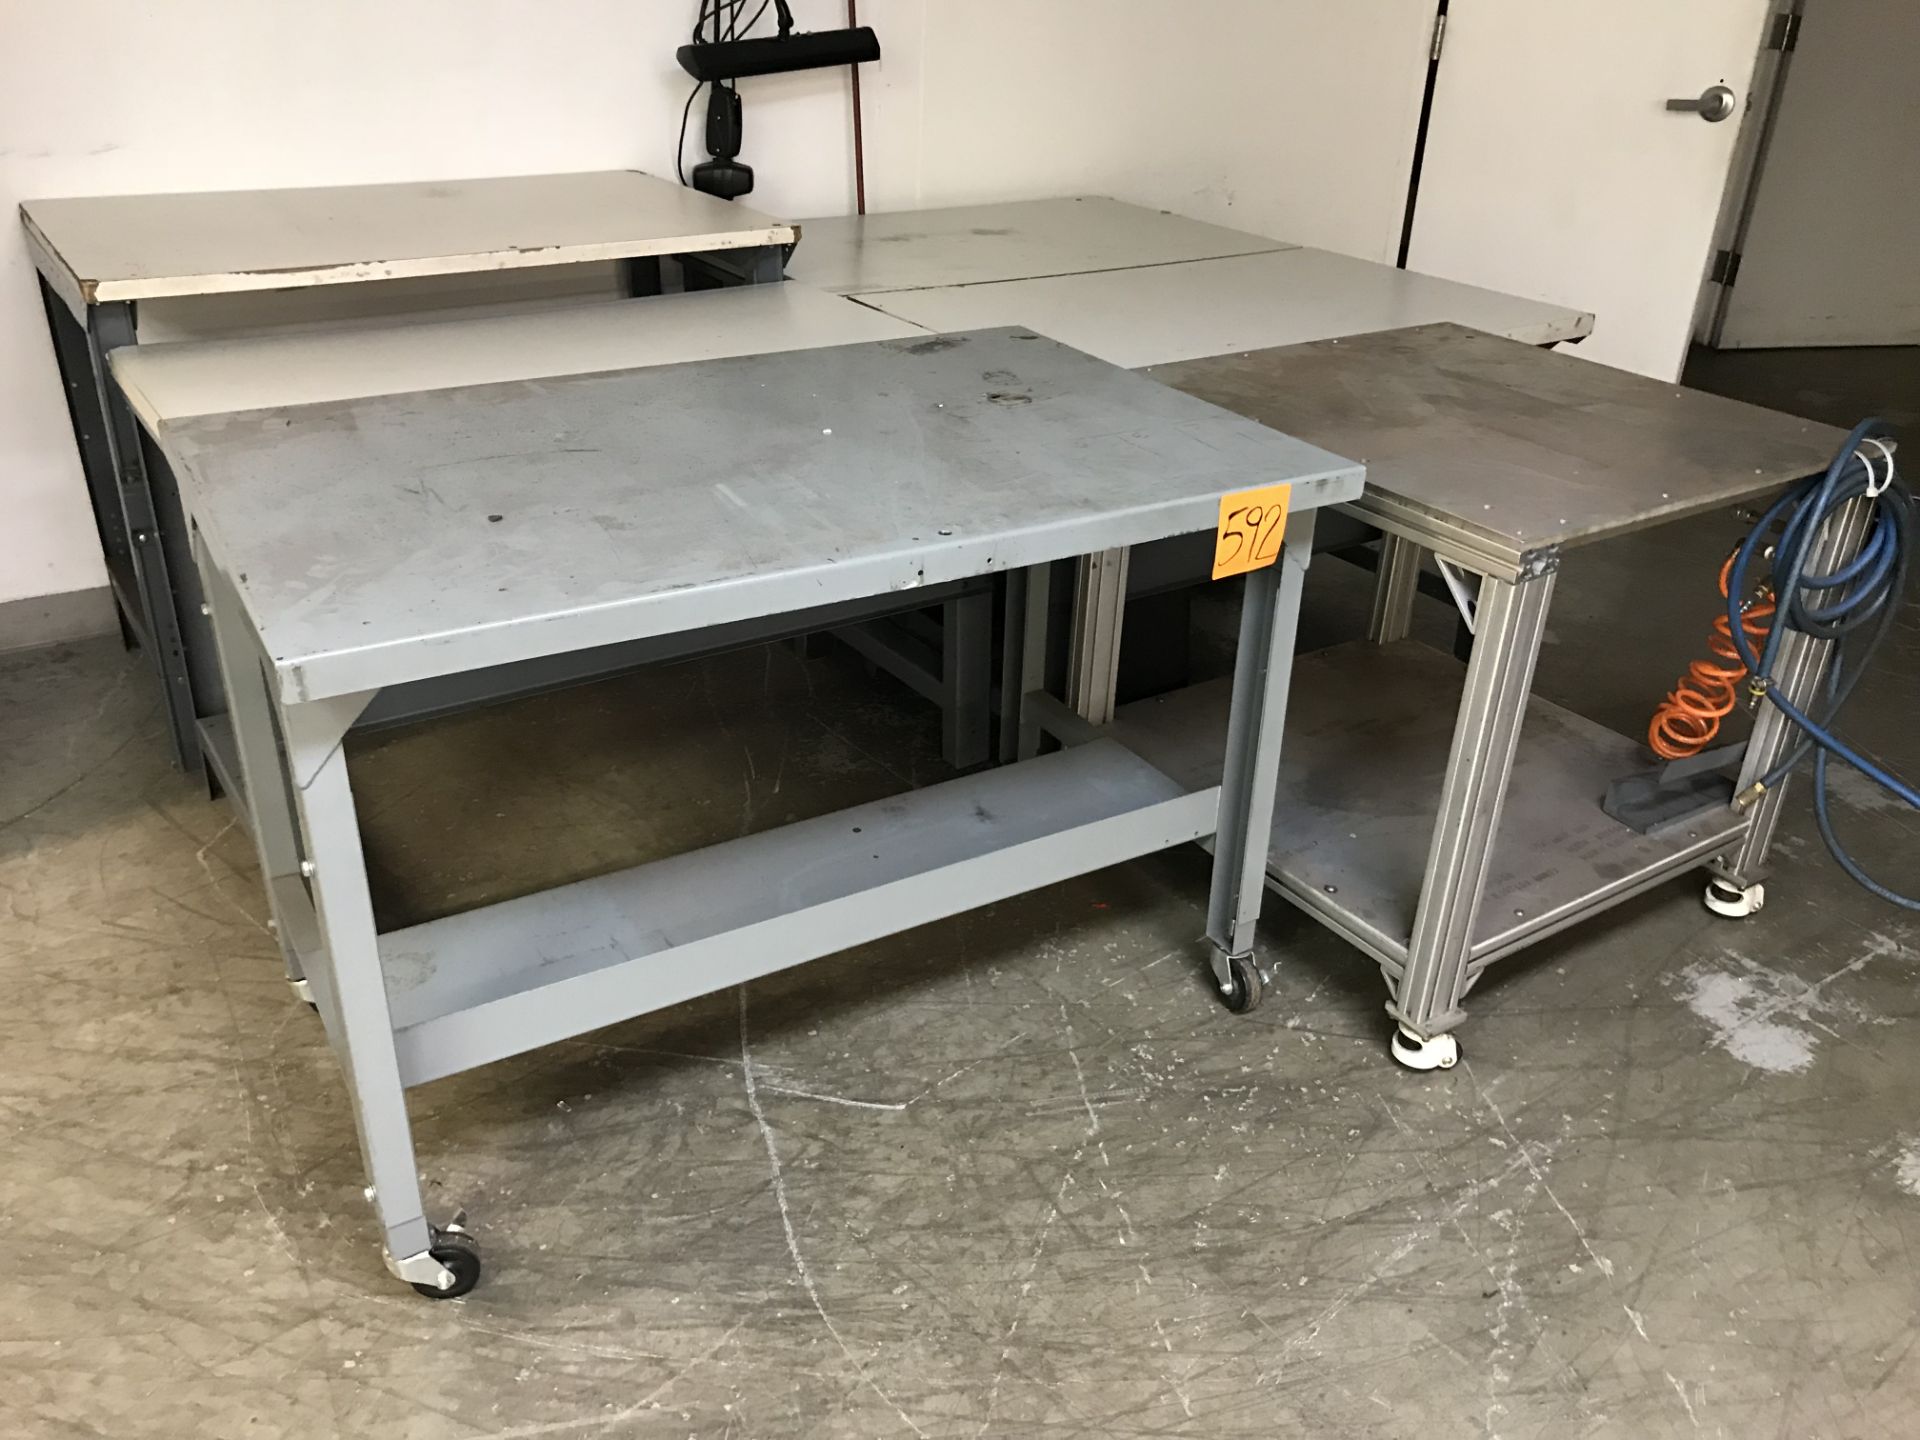 Lot of Work Benches and Work Tables